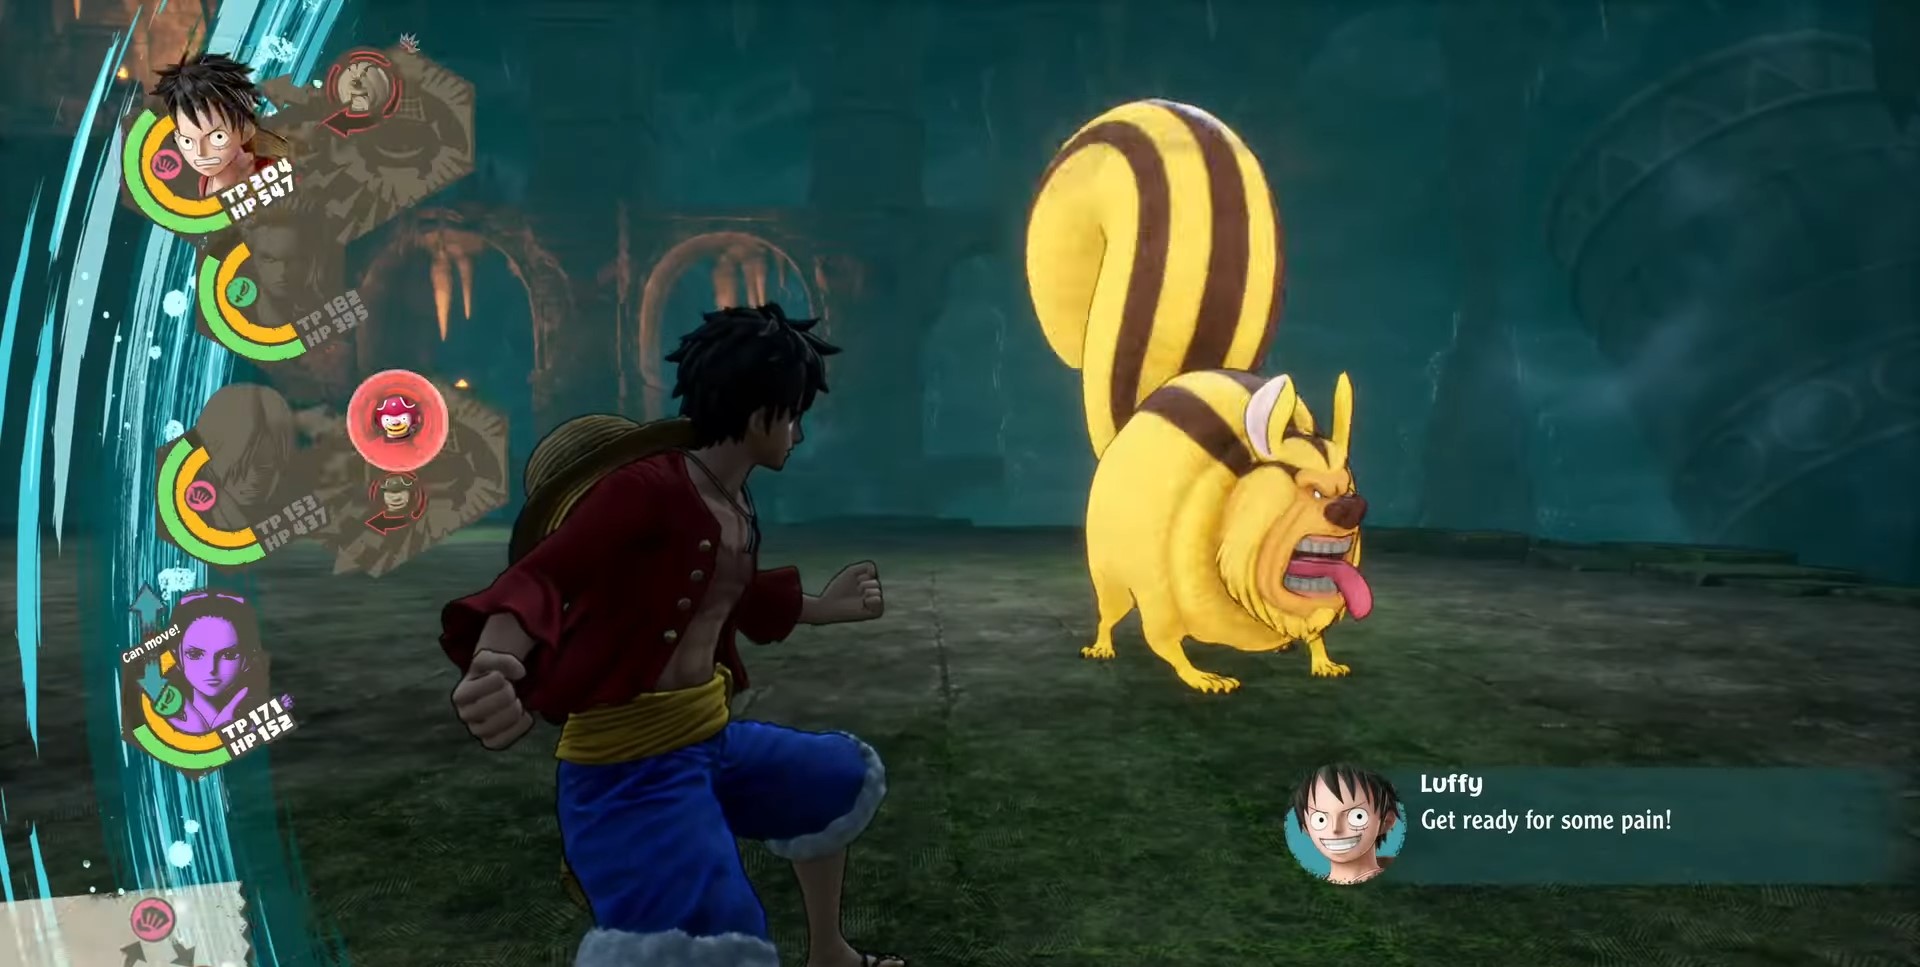 Use Attacks of Luffy to defeat Death Squirrel